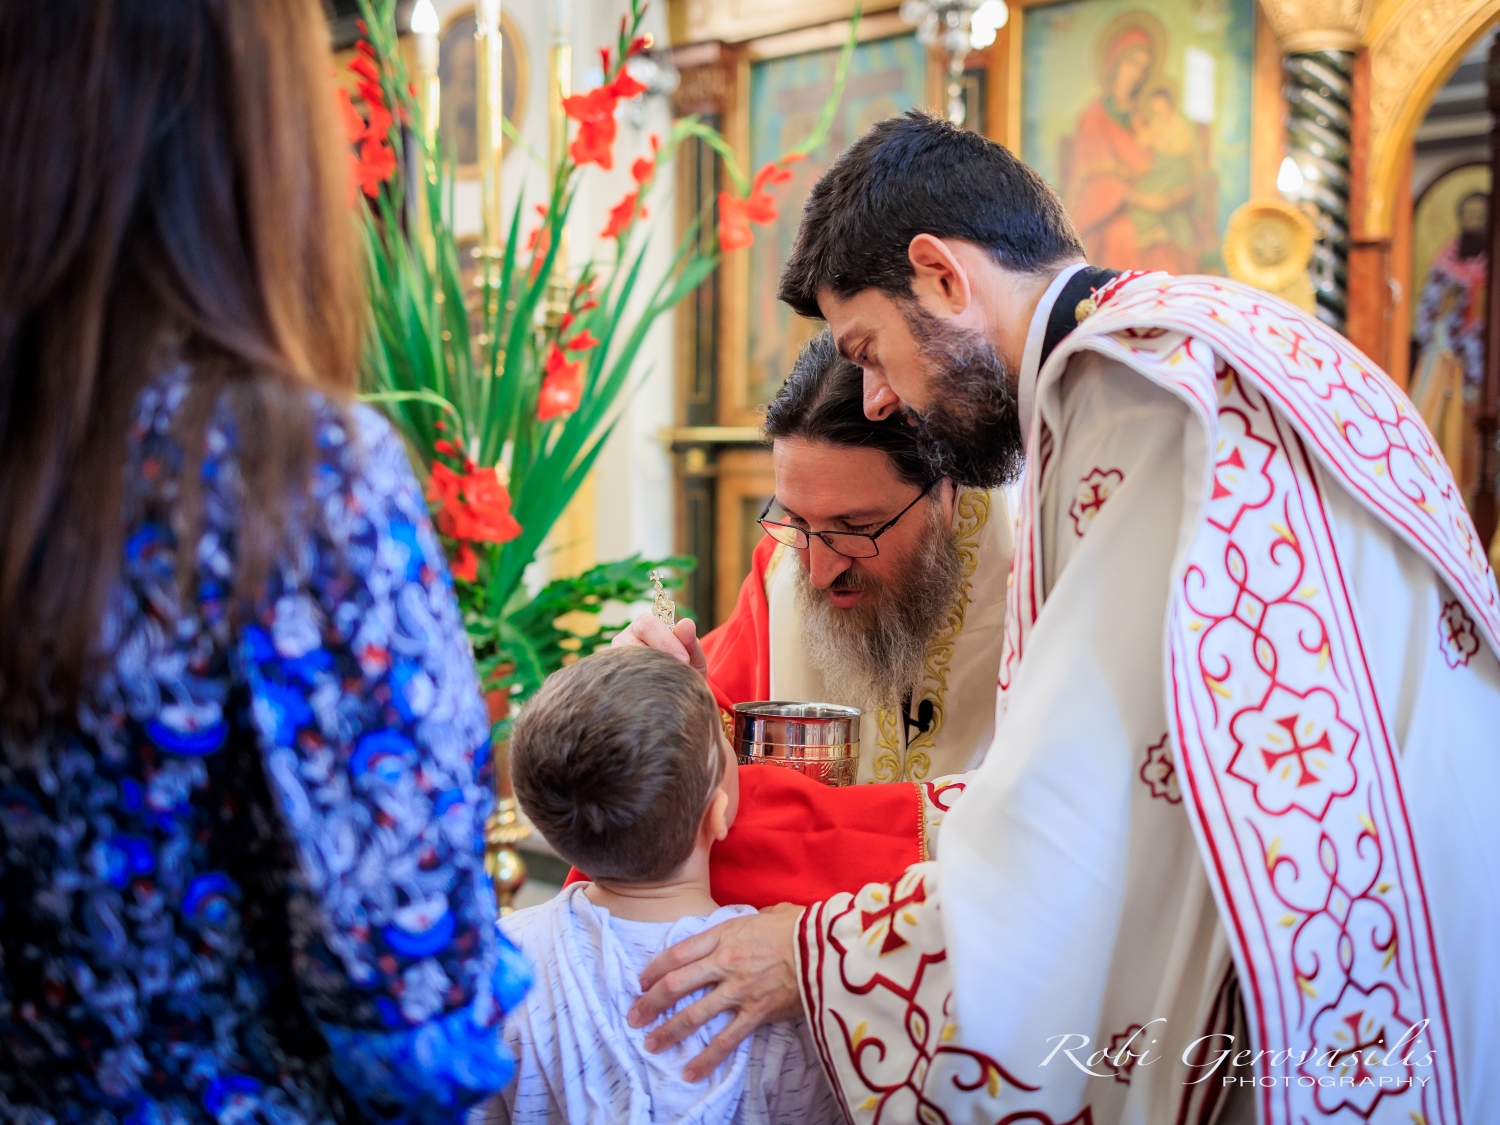 Perth: Feast of the Holy Forefathers celebrated at the Church of Sts Constantine and Helene